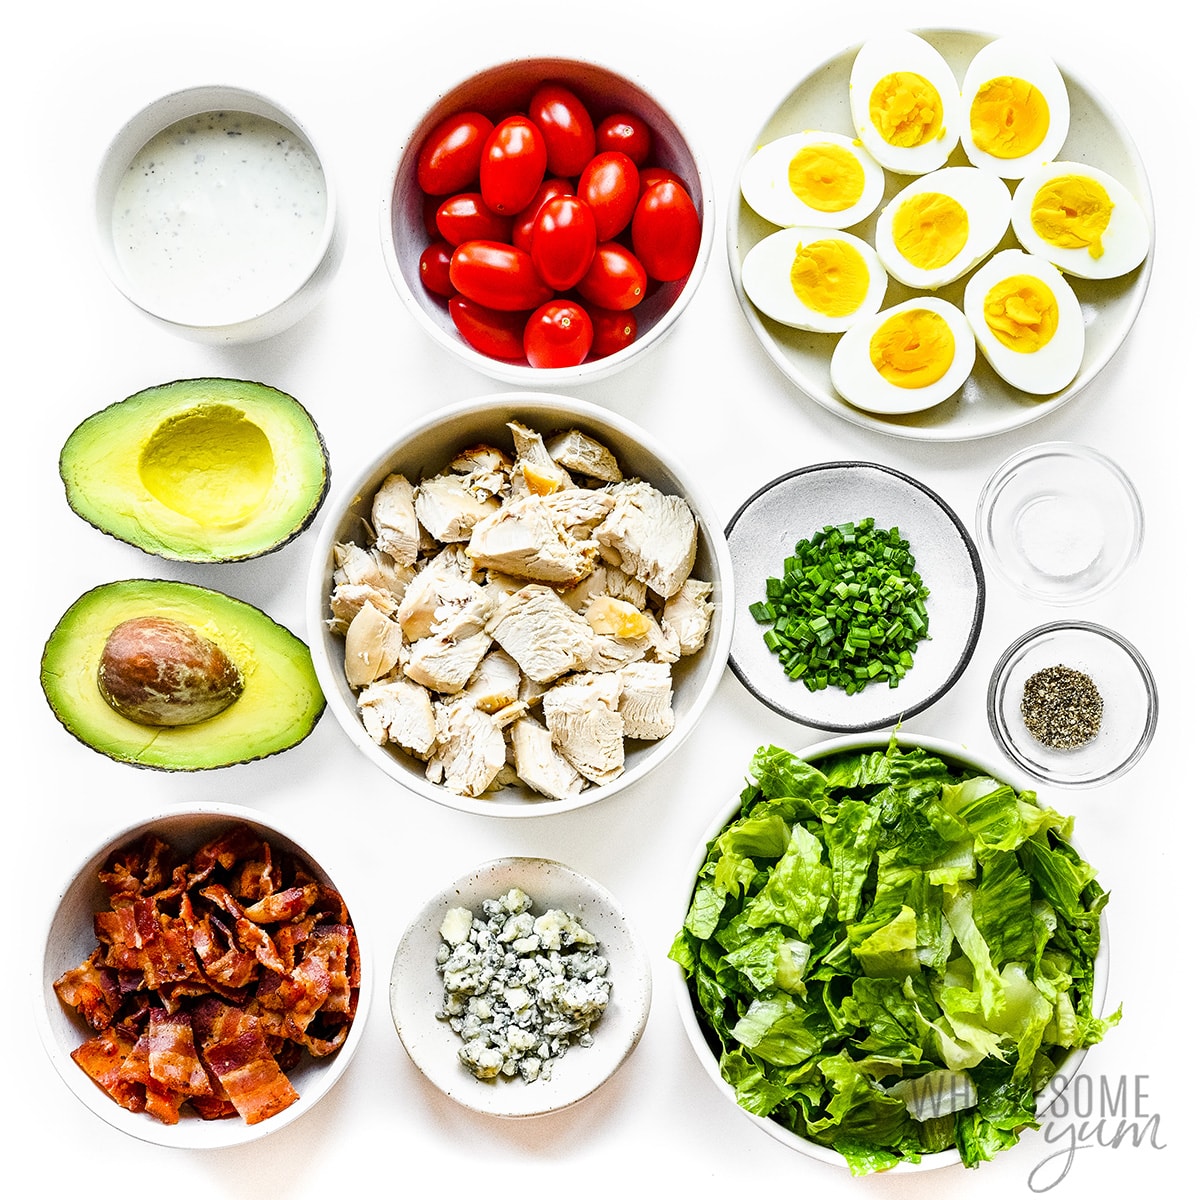 Cobb salad recipe ingredients measured out in bowls.